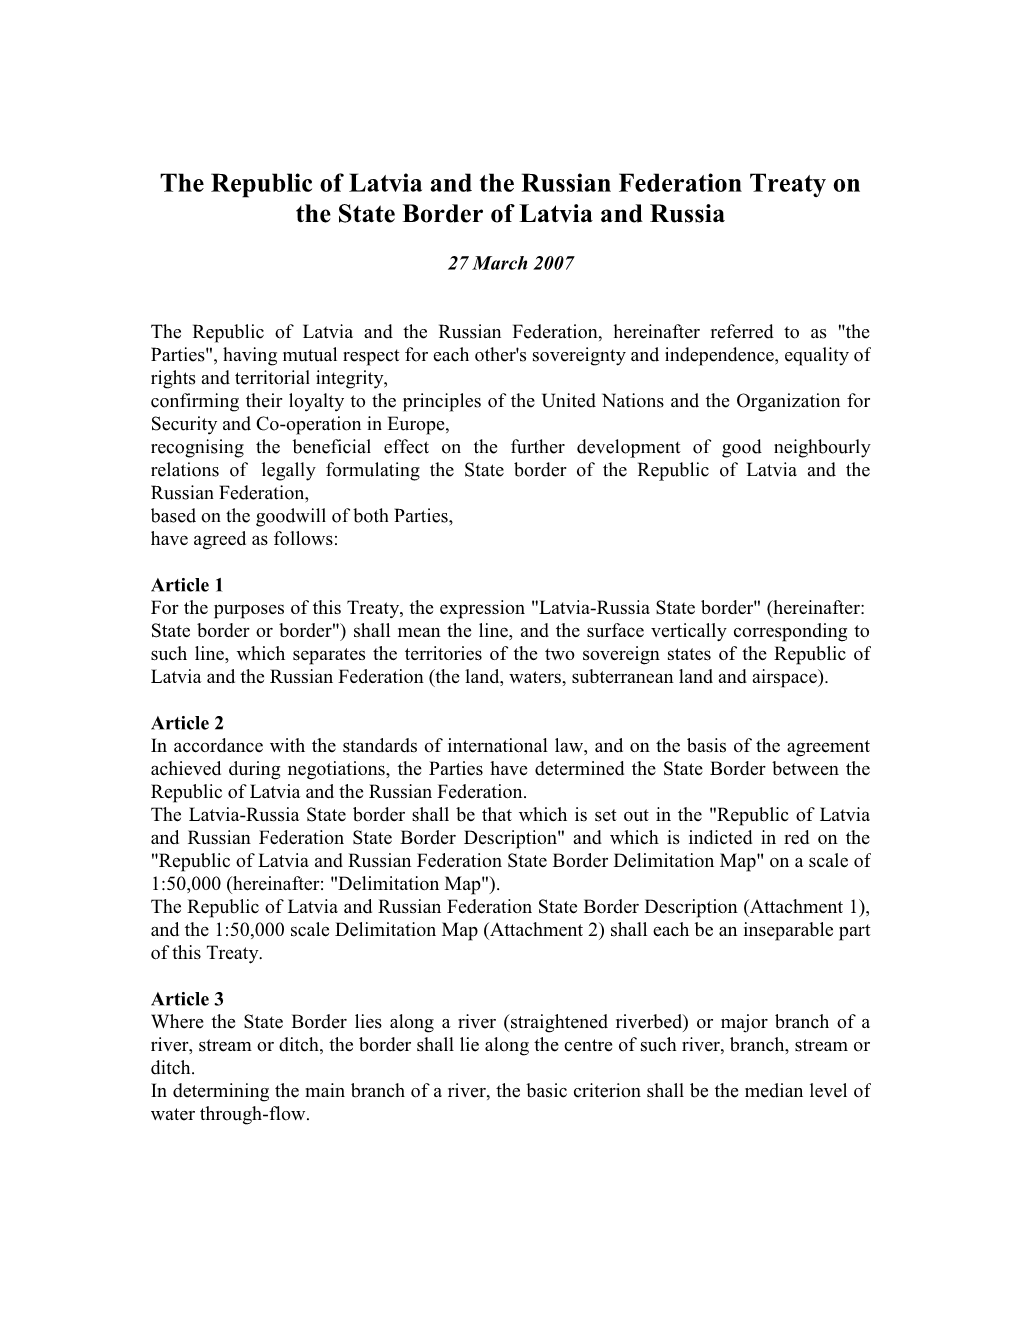 The Republic of Latvia and the Russian Federation Treaty on the State Border of Latvia and Russia